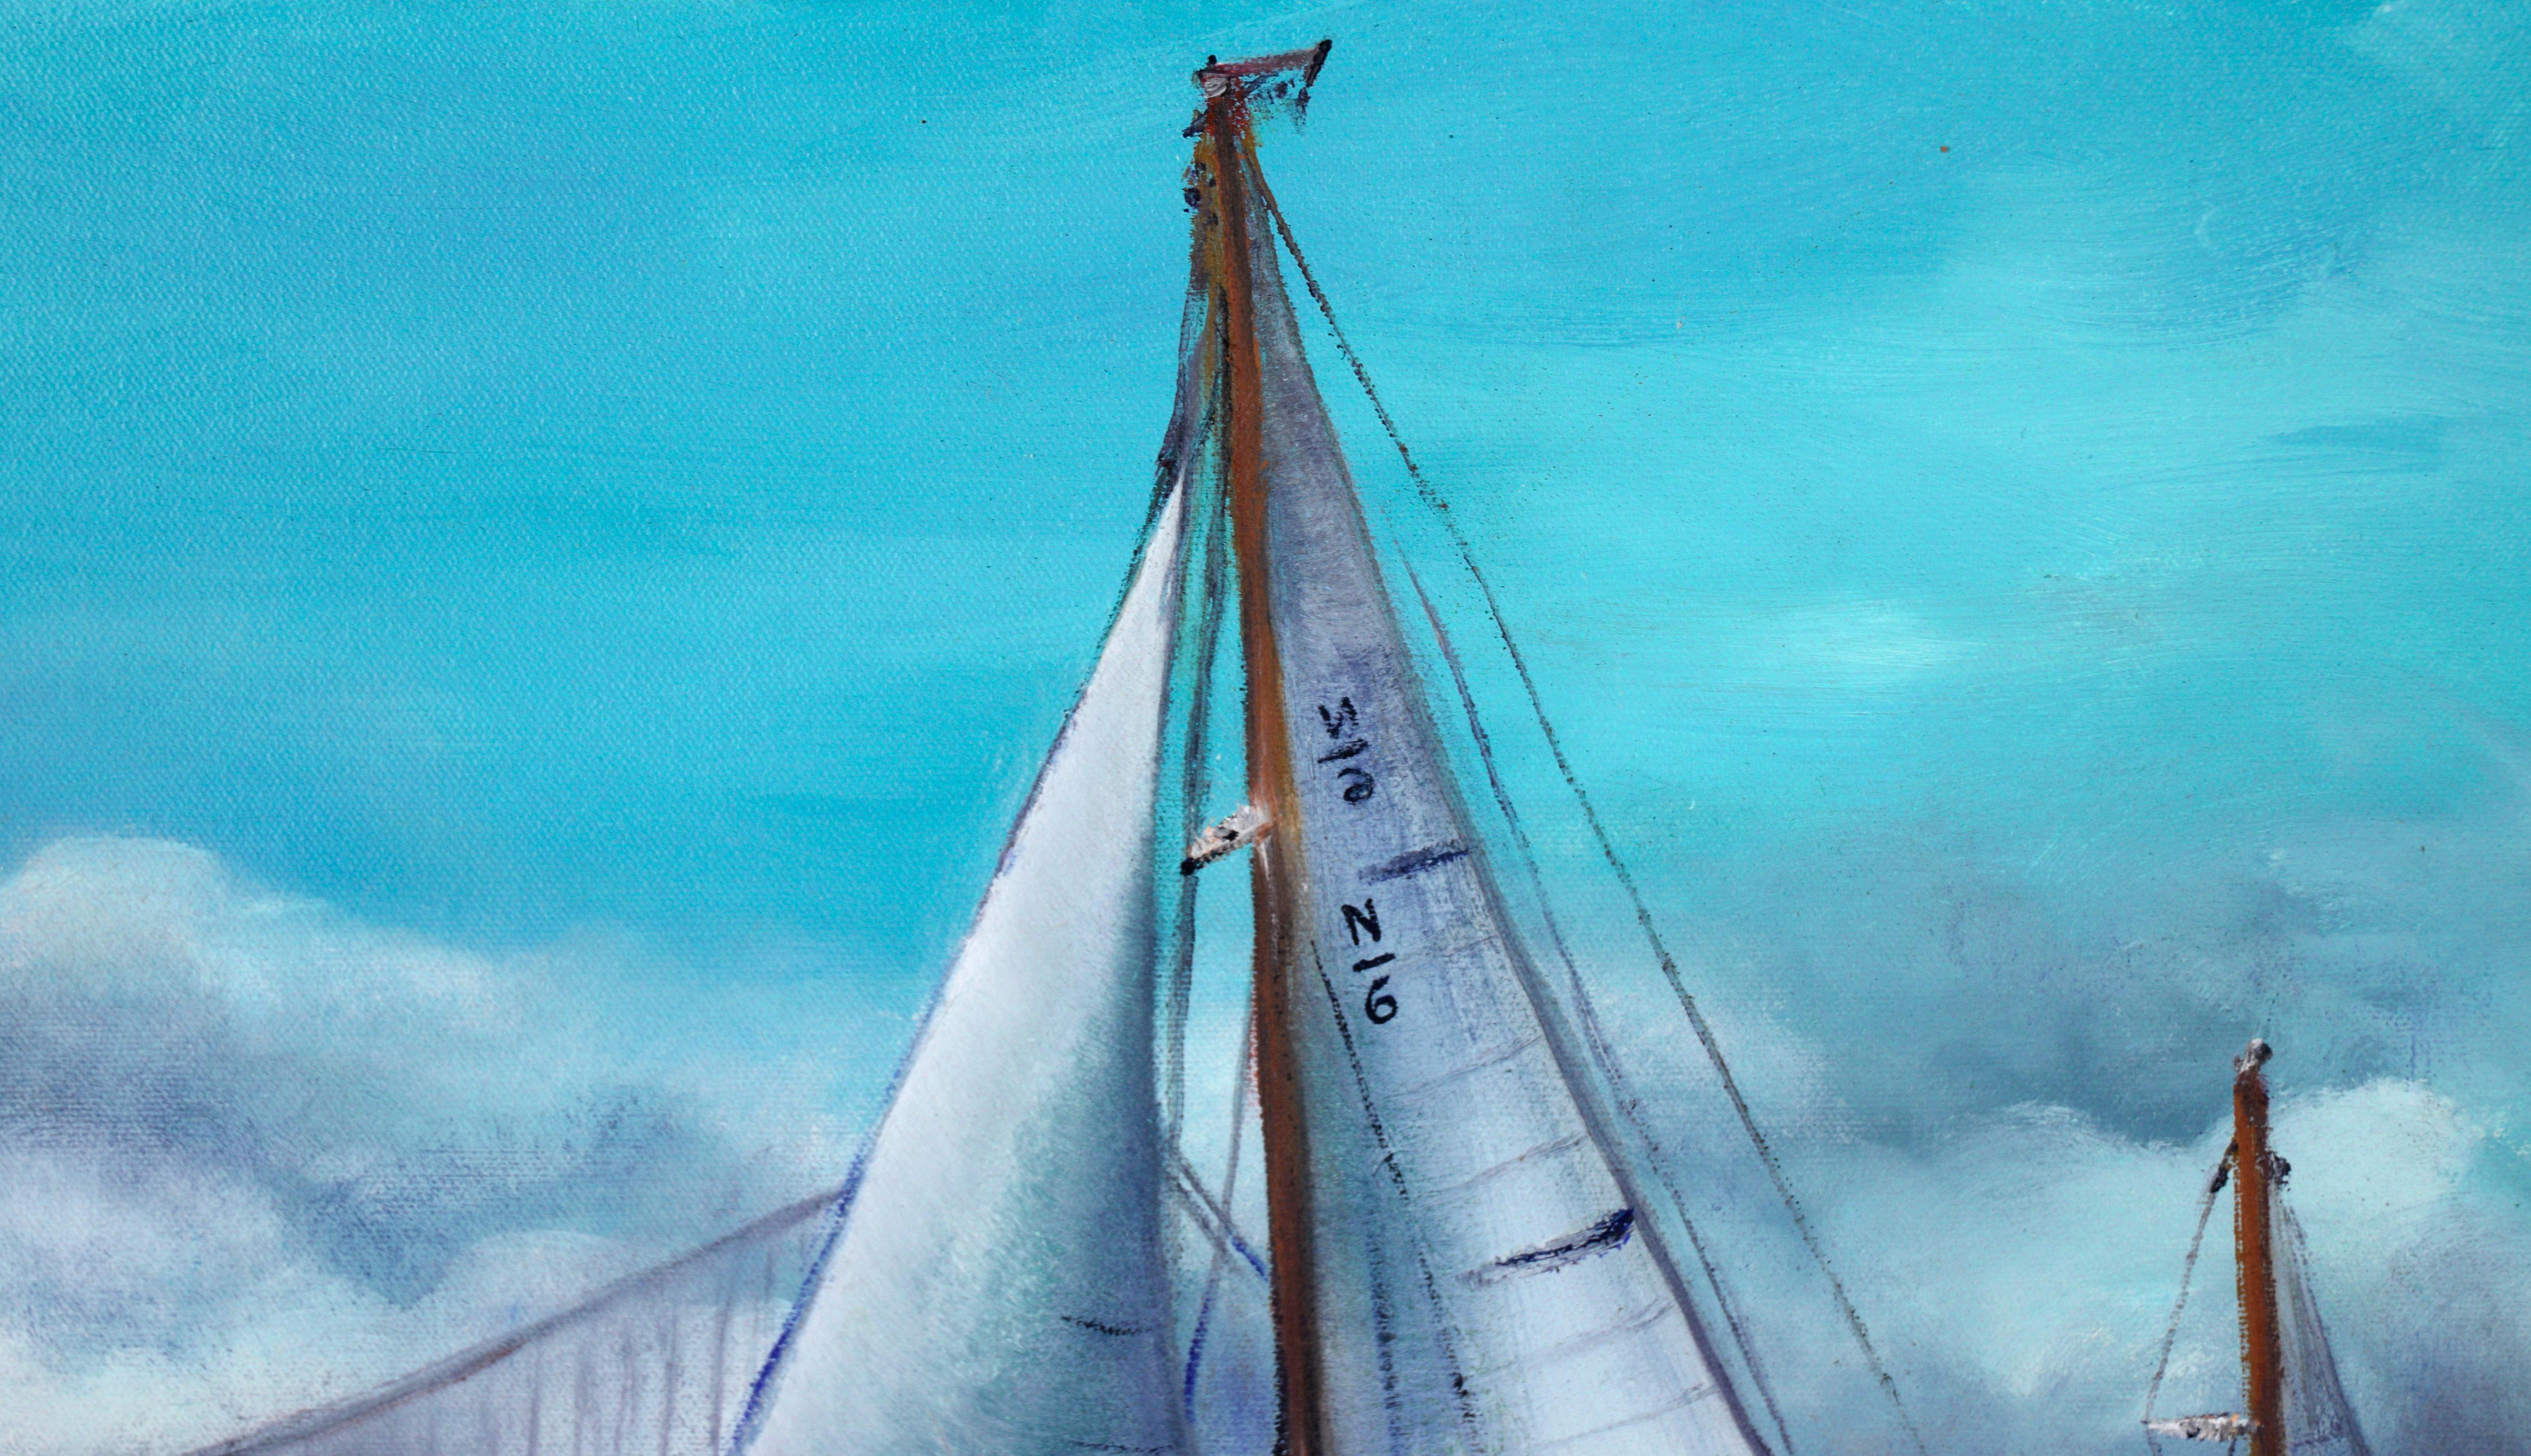 Sailing Regatta Under the Golden Gate Bridge - Seascape in Oil on Canvas - American Impressionist Painting by Unknown